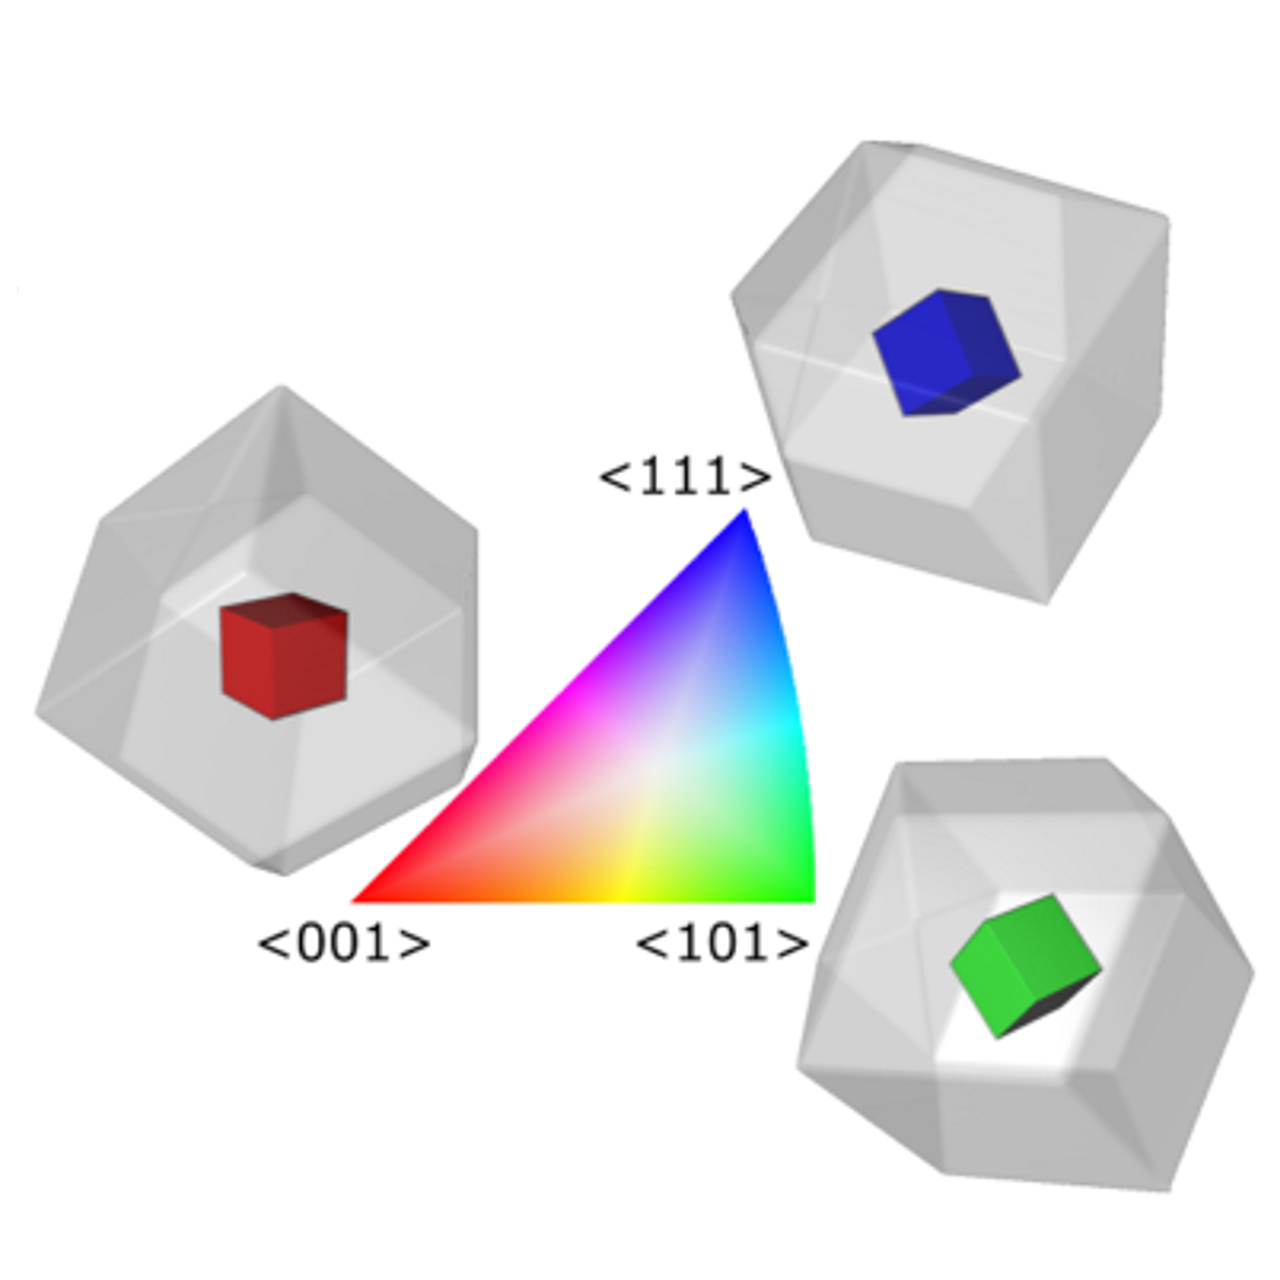 Orientational color bar, with sketches showing what each orientation means in terms of a hexamine crystal. Image reproduced from Gajjar et al. under a CC-BY license.